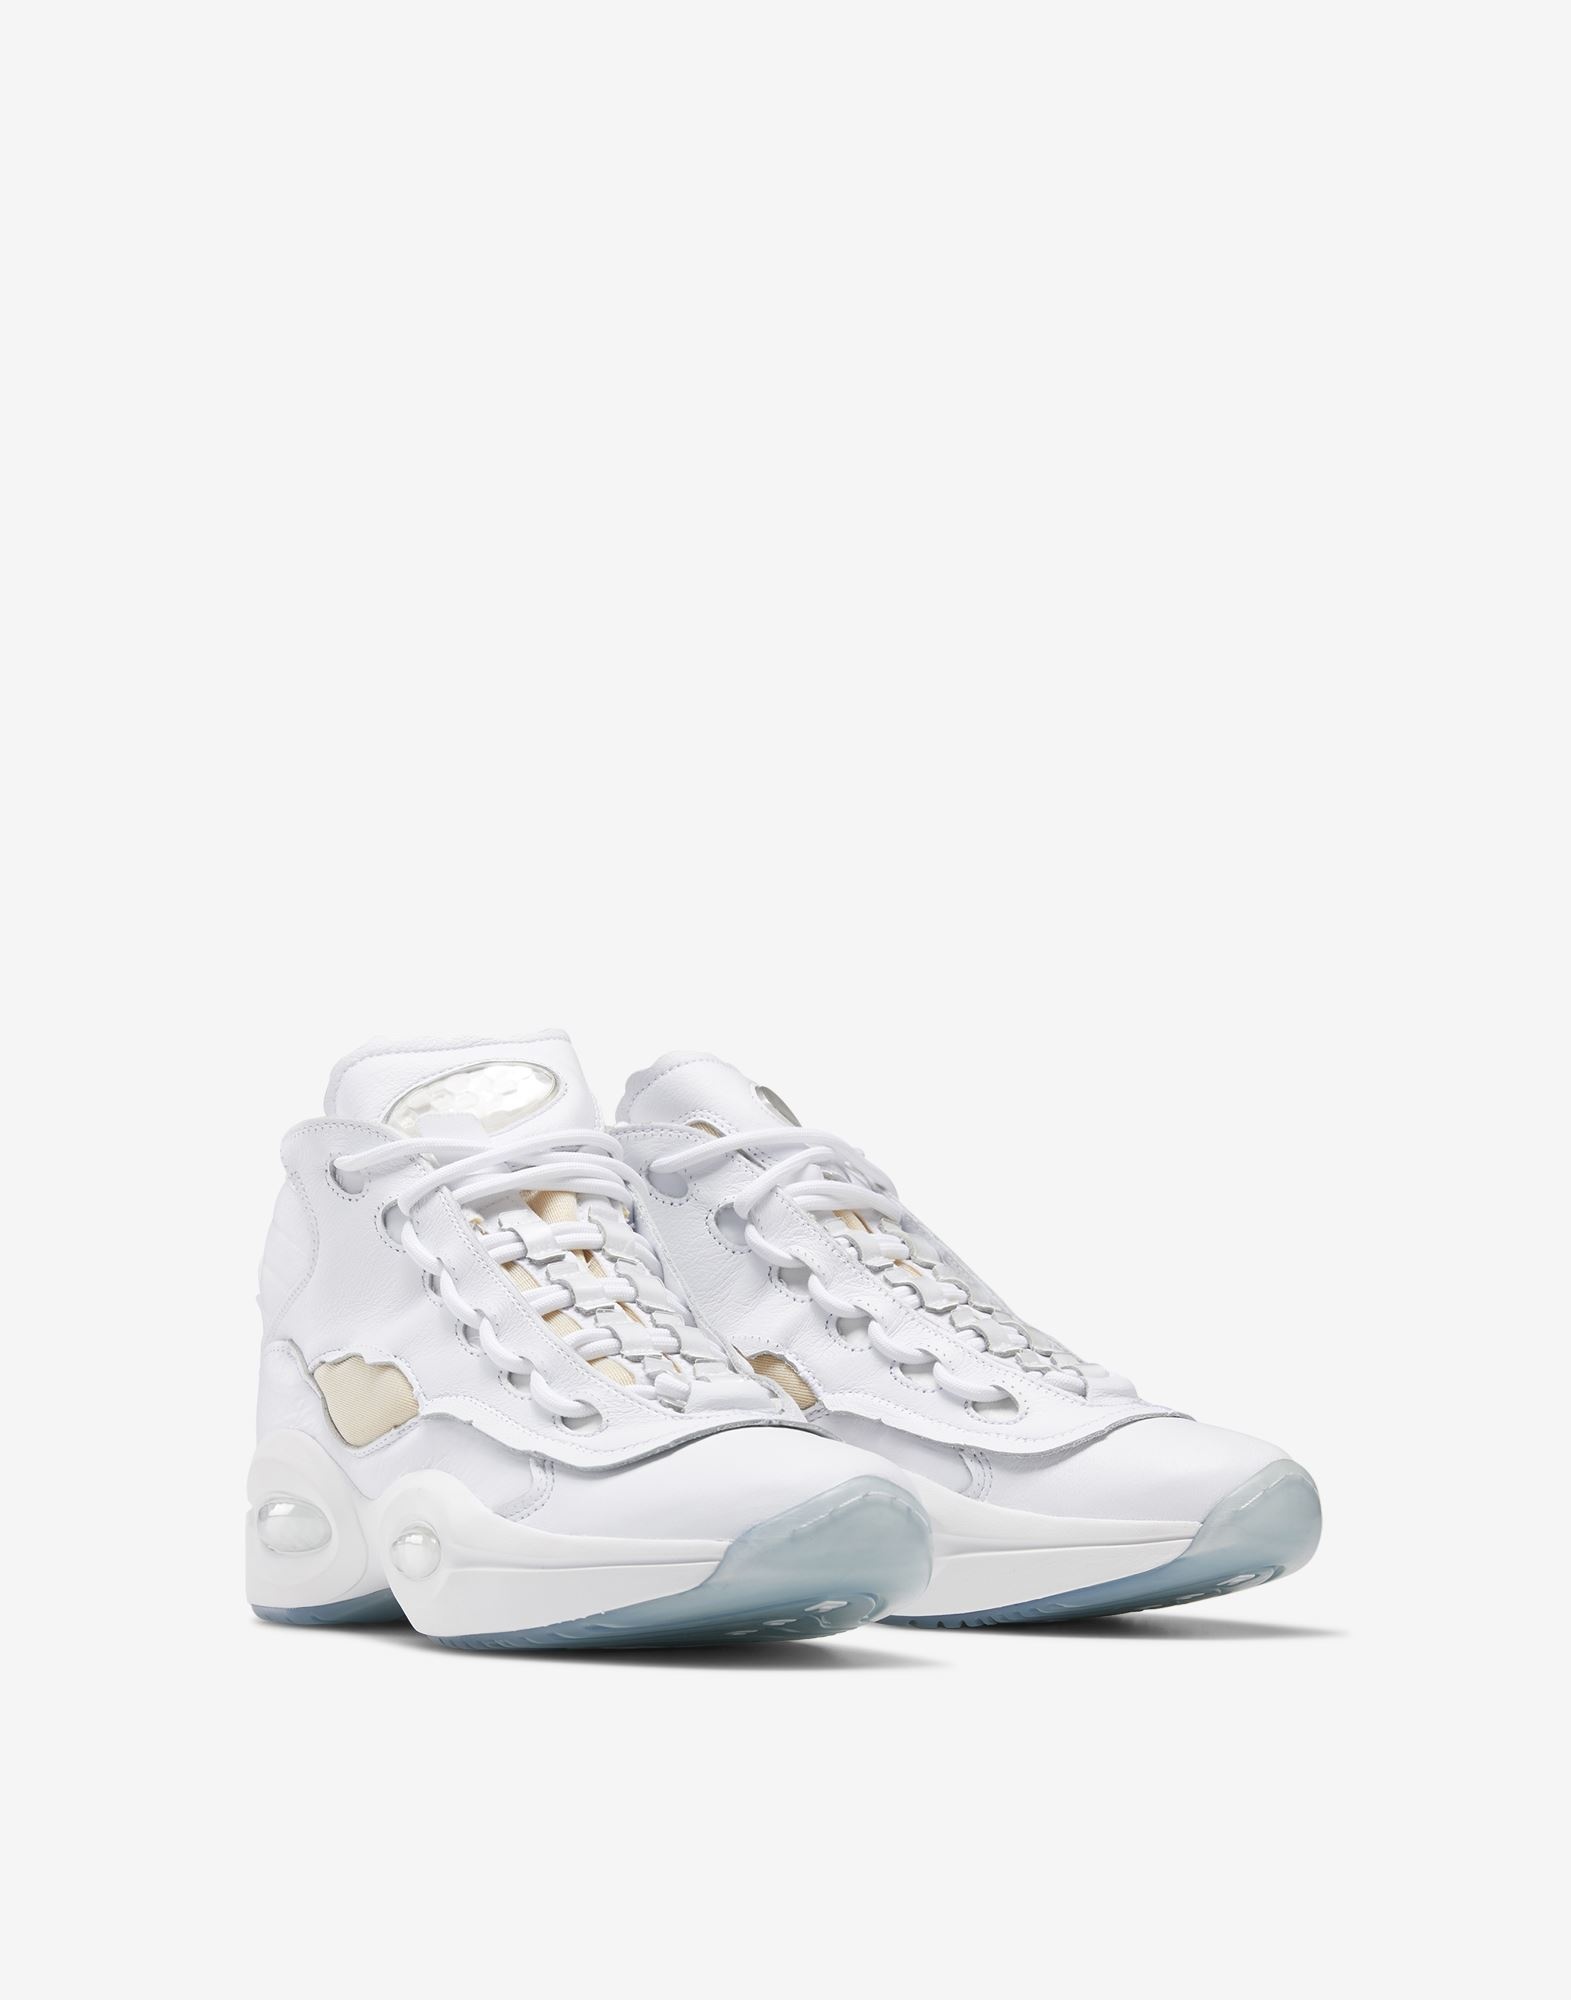 MM x Reebok The Question Memory Of sneakers - 2